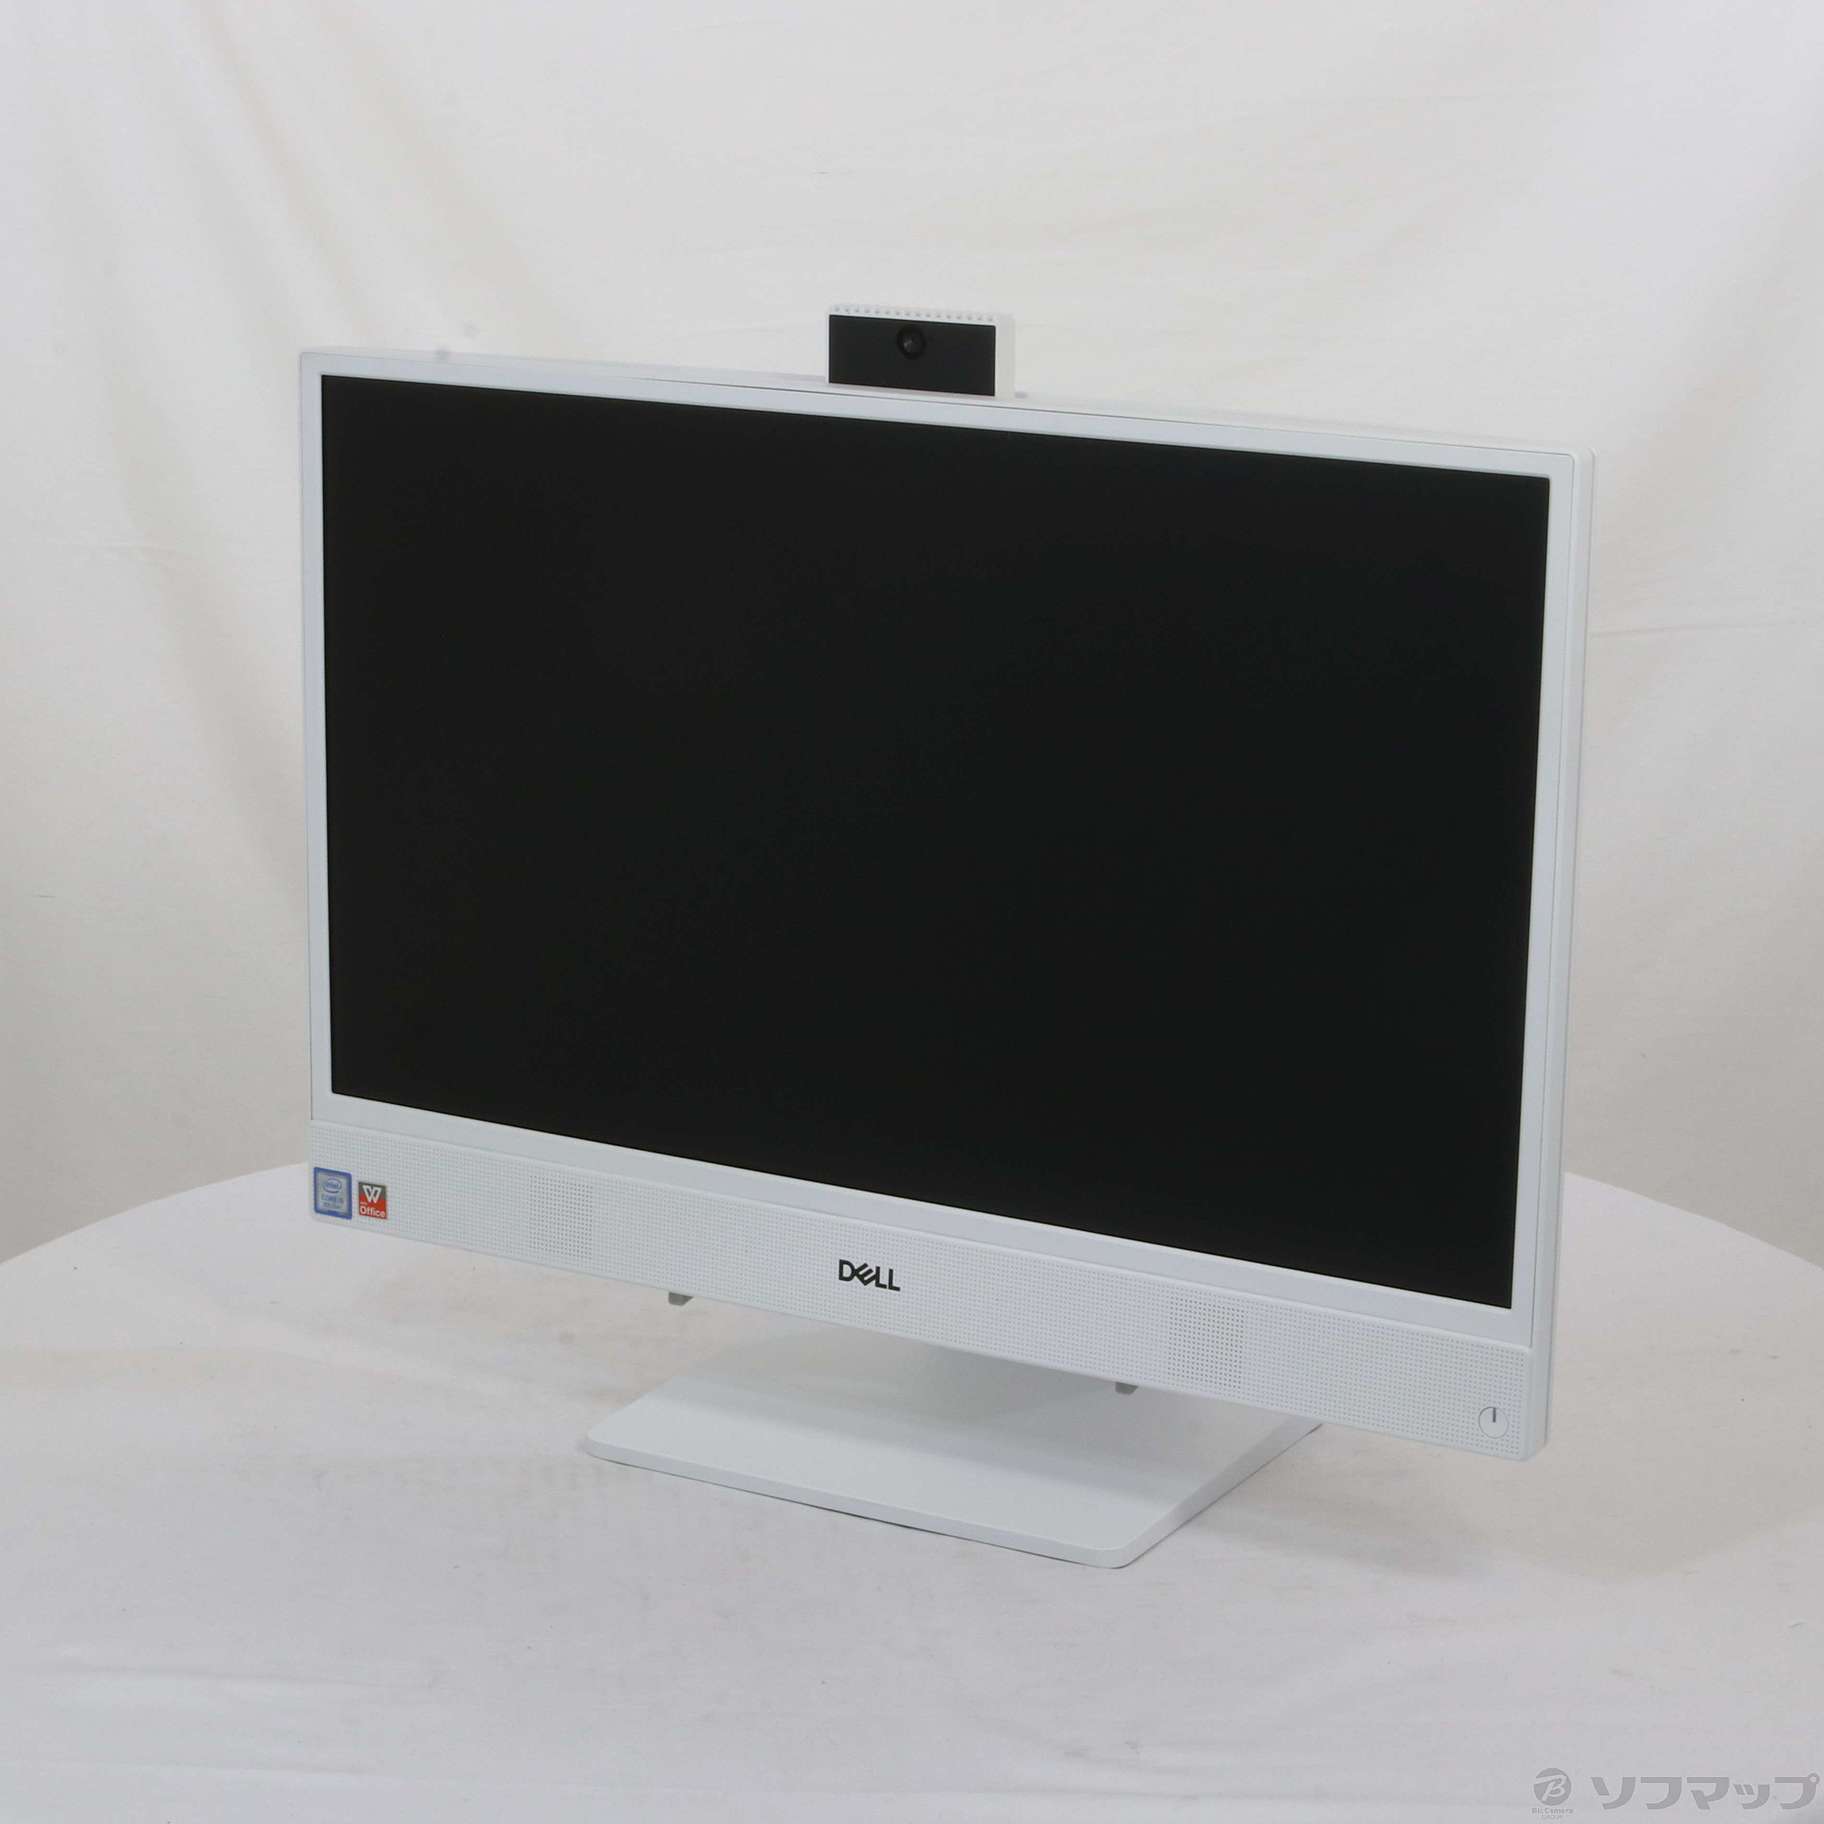 Dell Inspiron 3280 All-In-One22インチデスクトップ-